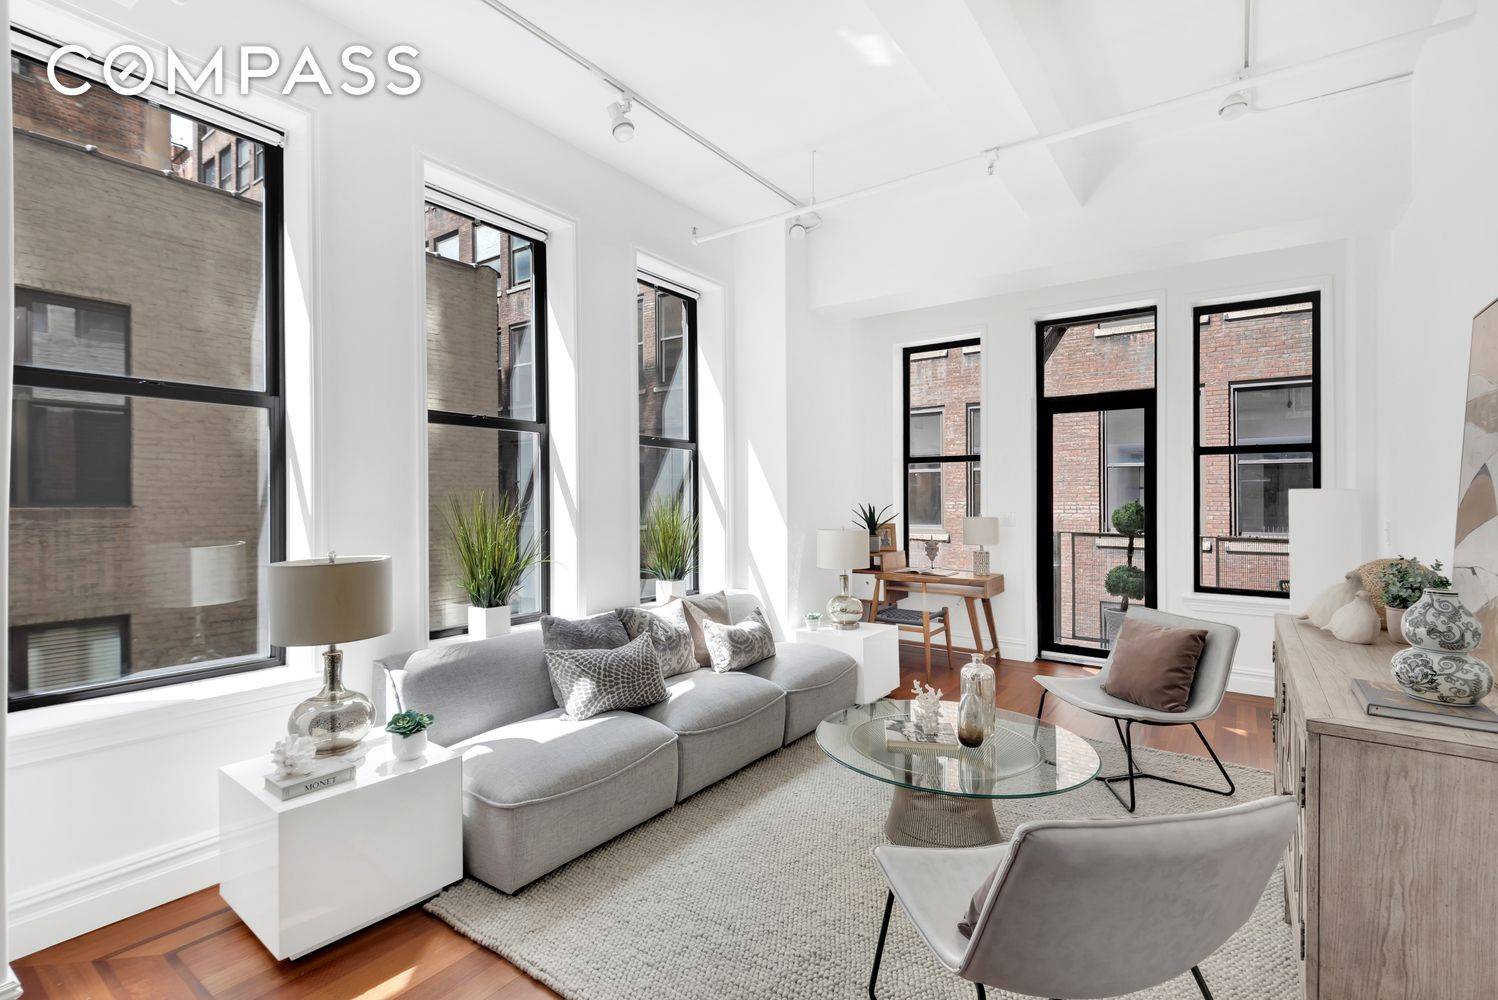 Welcome home to this spacious 2 bed, 2 bath loft apartment with private outdoor space in the heart of NoMad Spanning over 1, 500SF of interior space, this special apartment ...